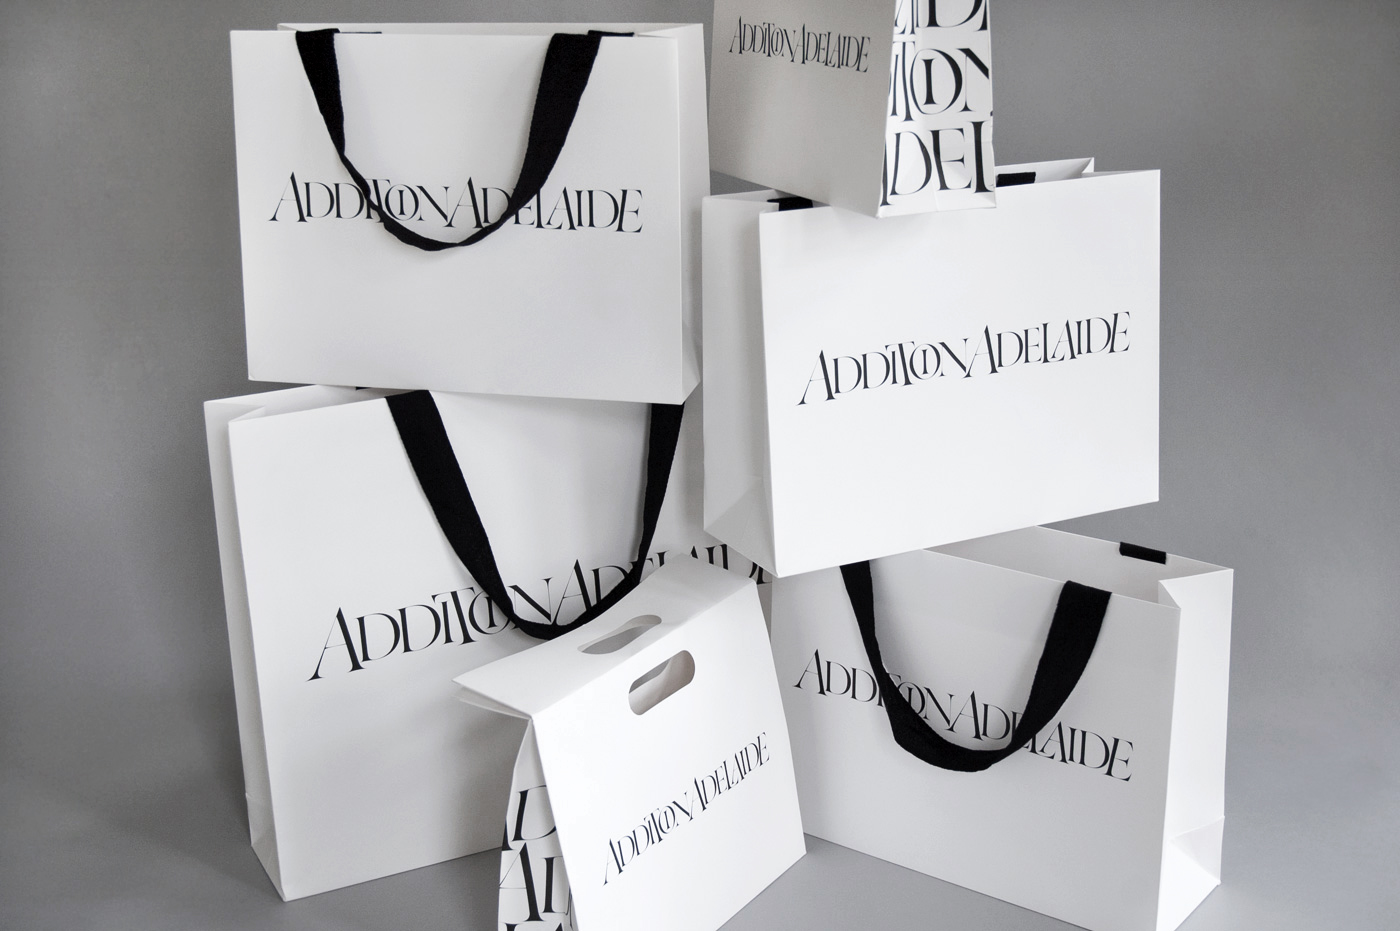 Addition Adelaide Tokyo – Shopping bags